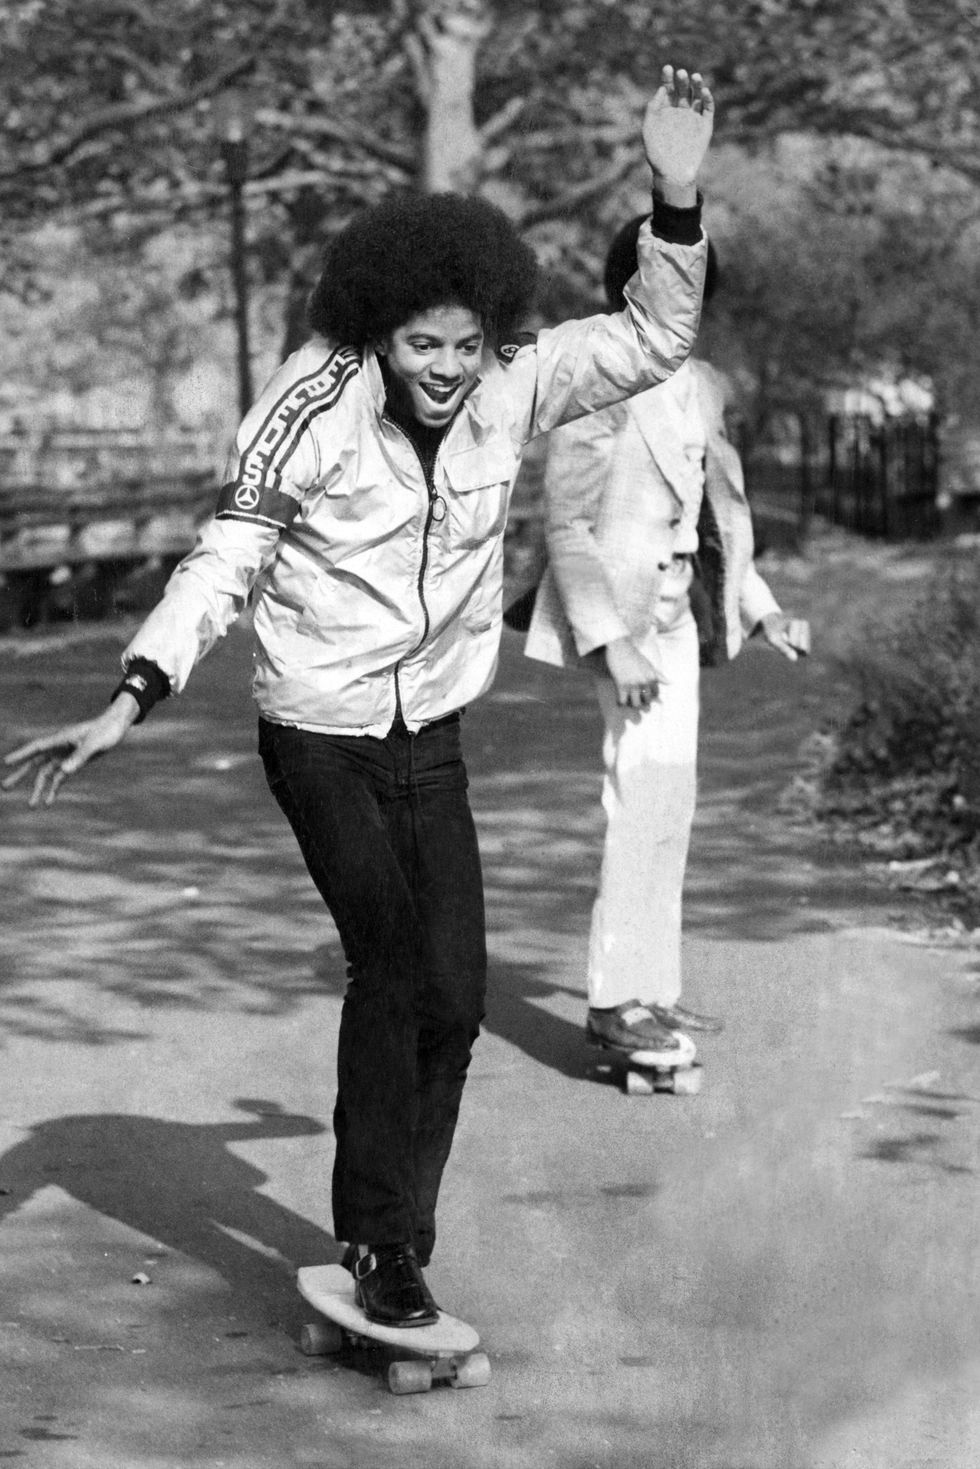 michael jackson with skateboard in central park